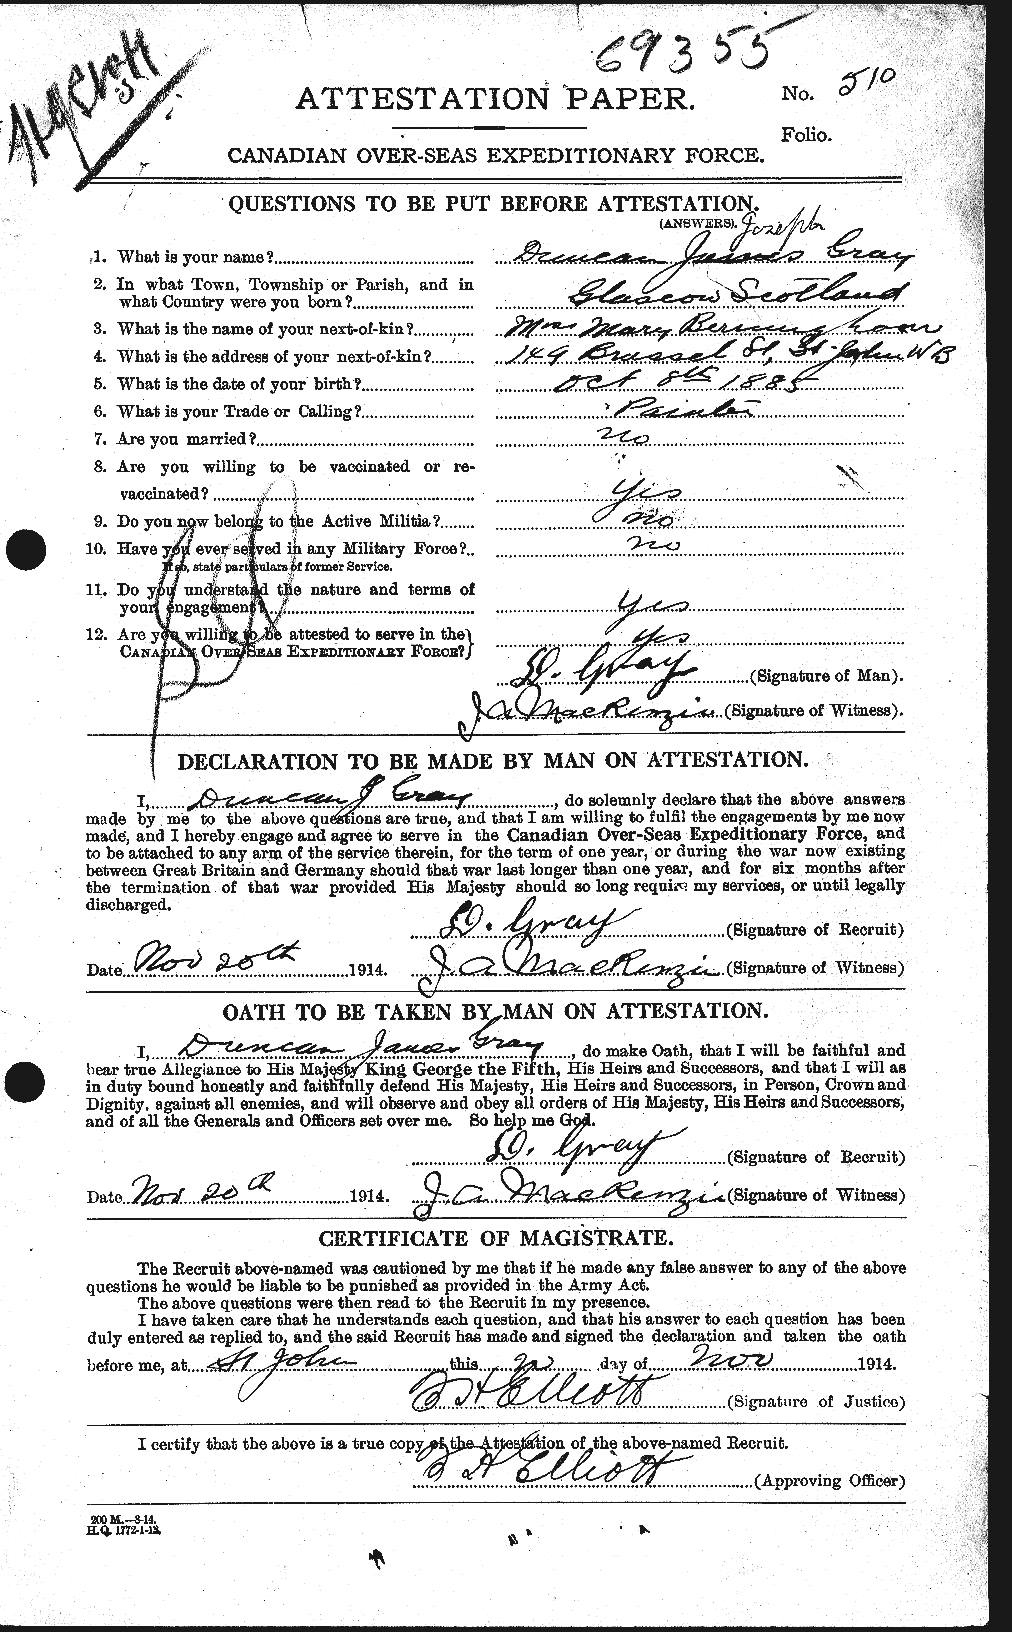 Personnel Records of the First World War - CEF 361490a